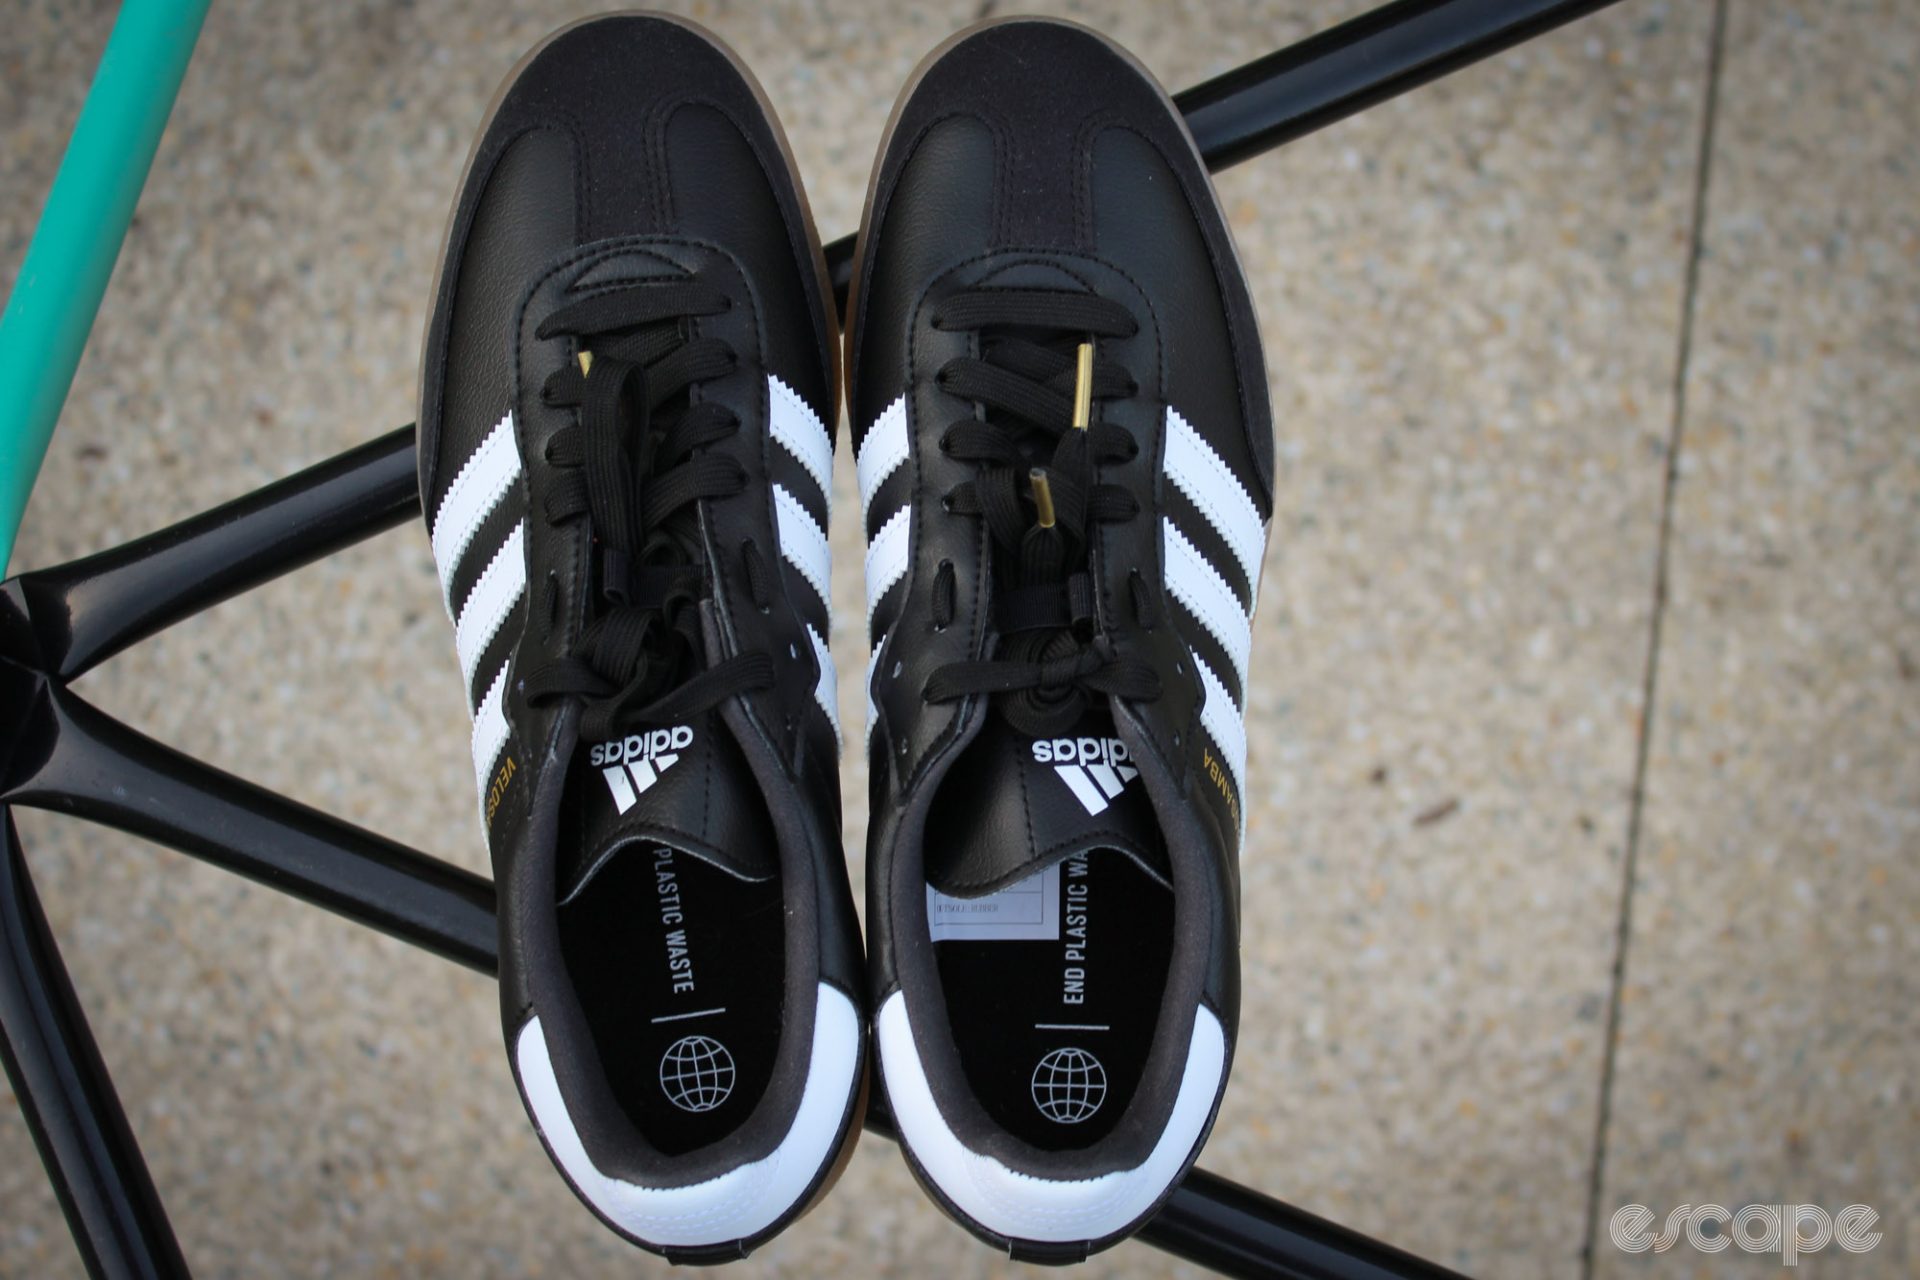 Review: Adidas Velosamba, casual with cleats - Escape Collective